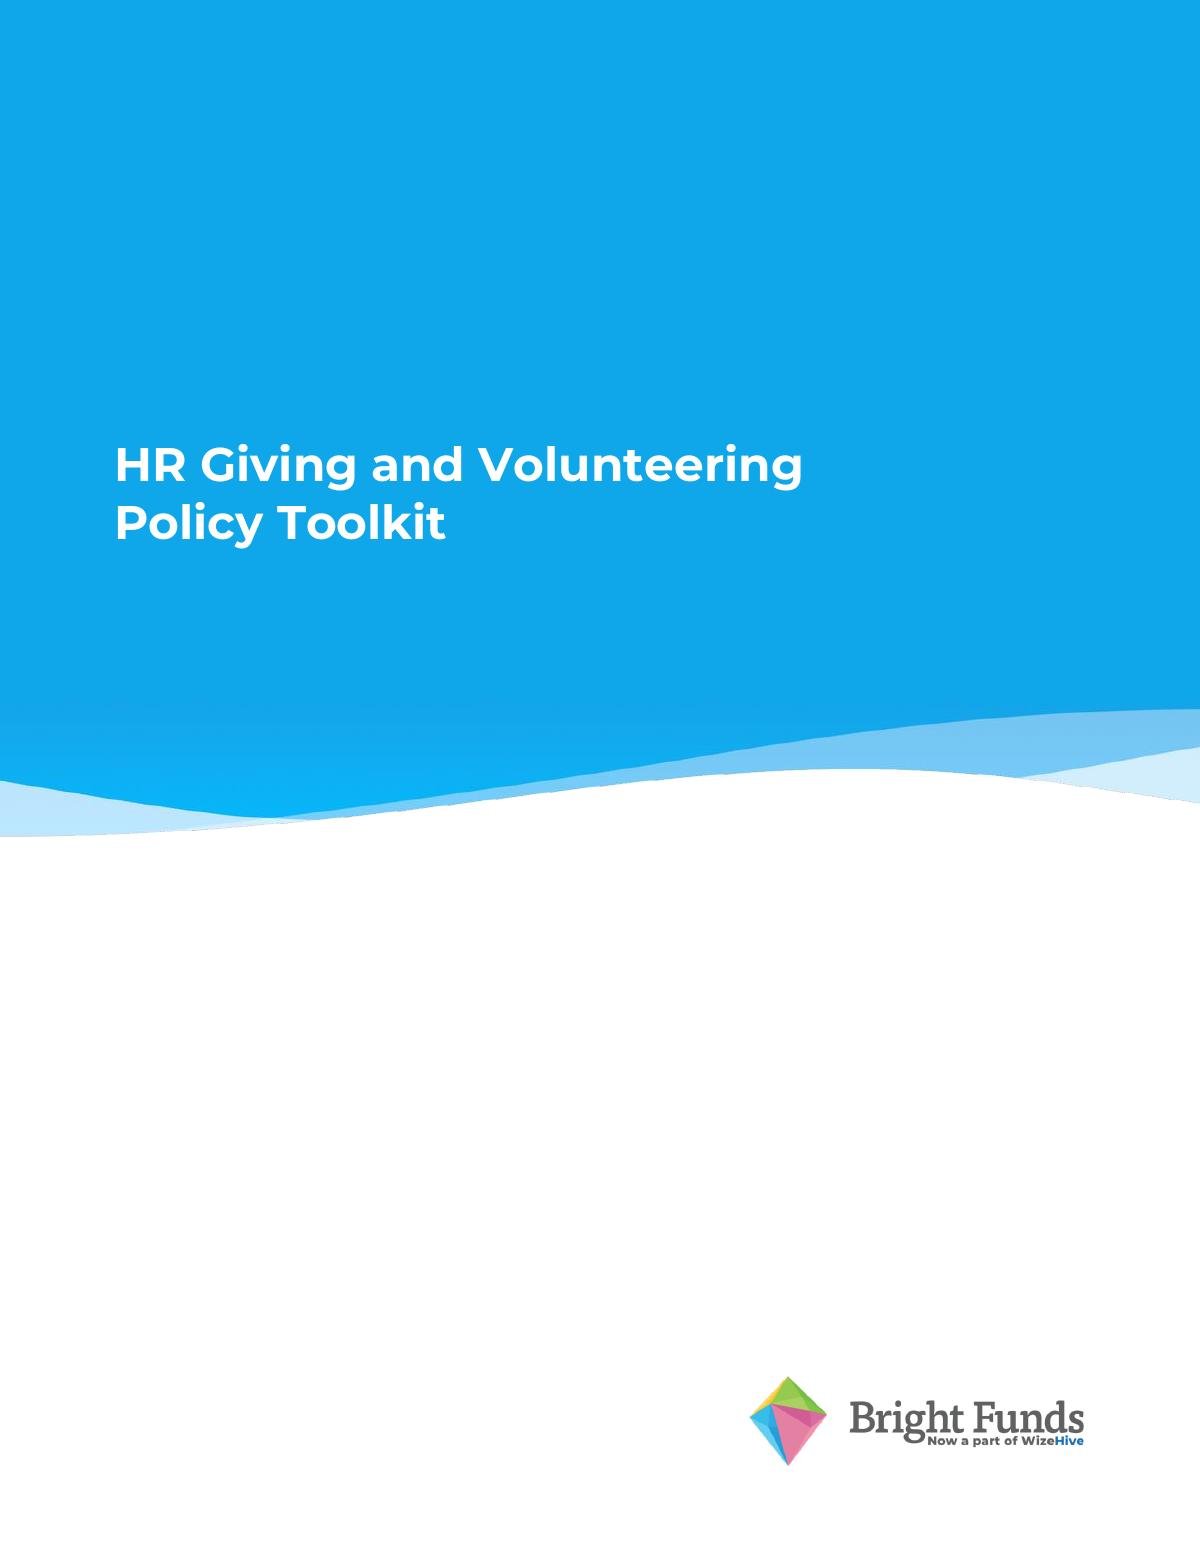 HR Giving and Volunteering Policy Toolkit